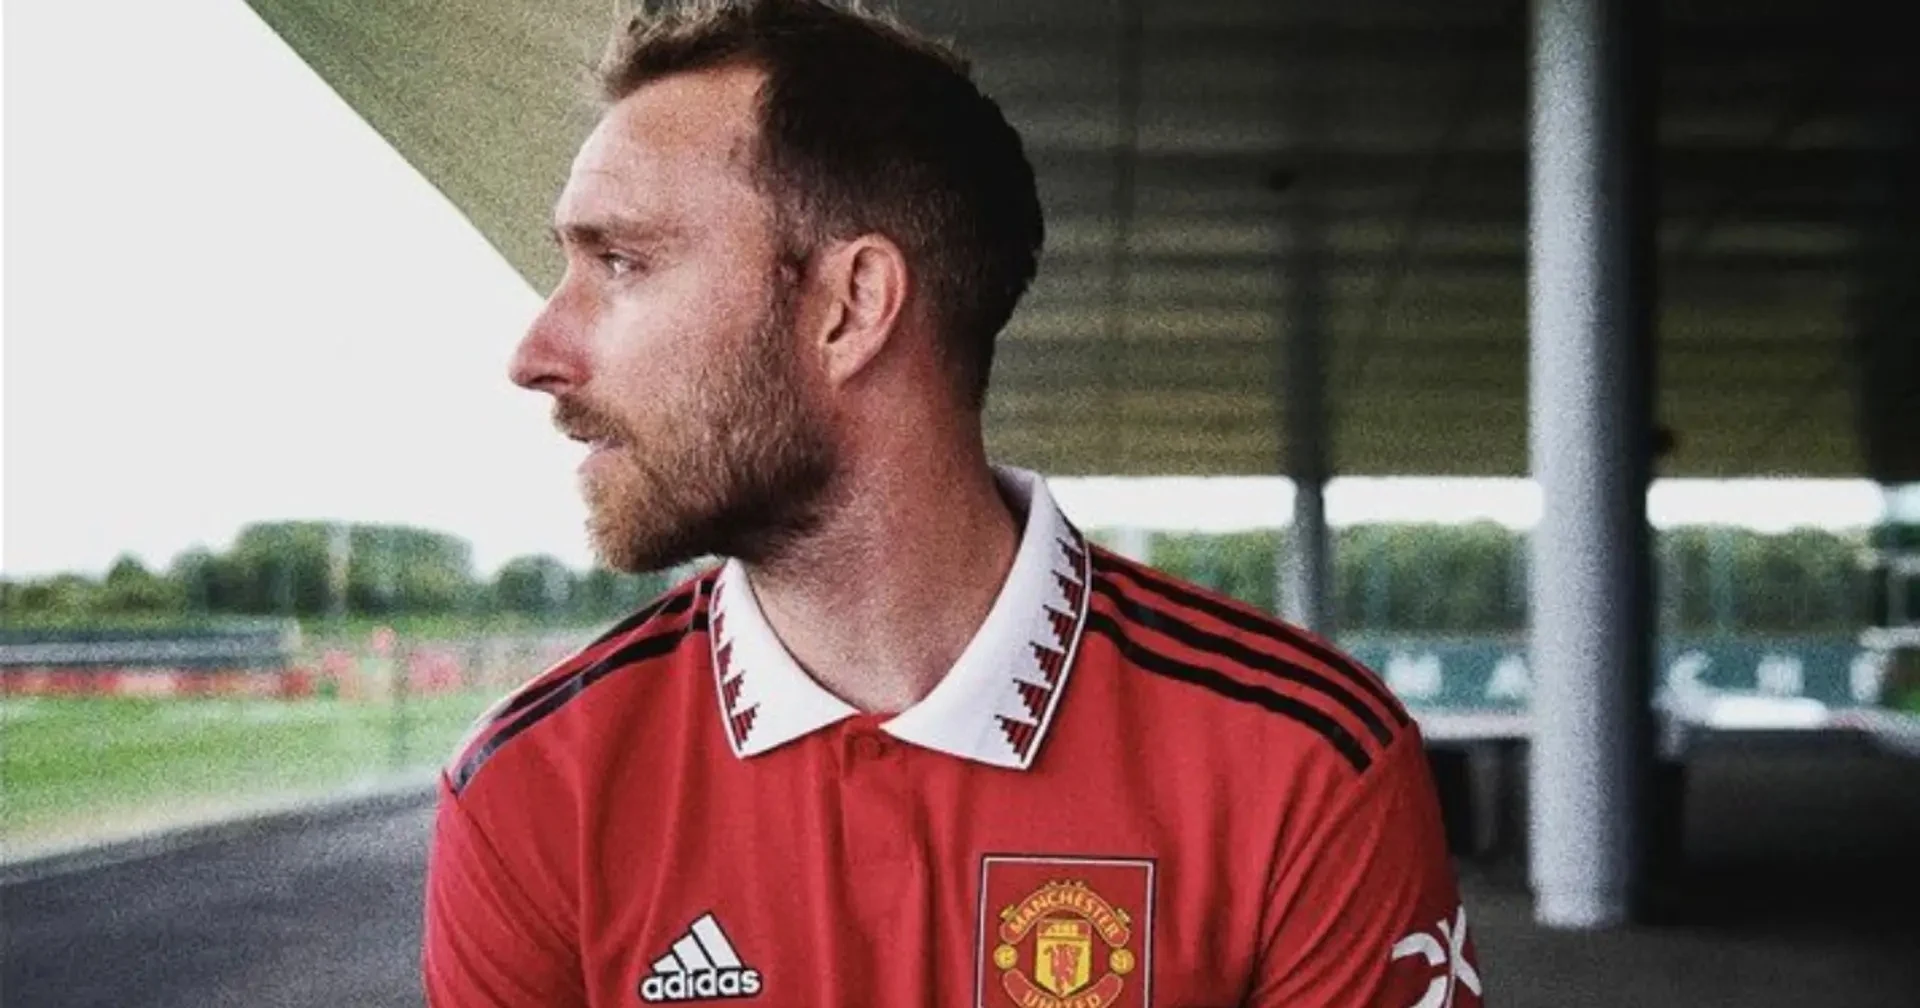 'I want to play football, I don't come here just for the logo': Christian Eriksen's first words as a Man United player